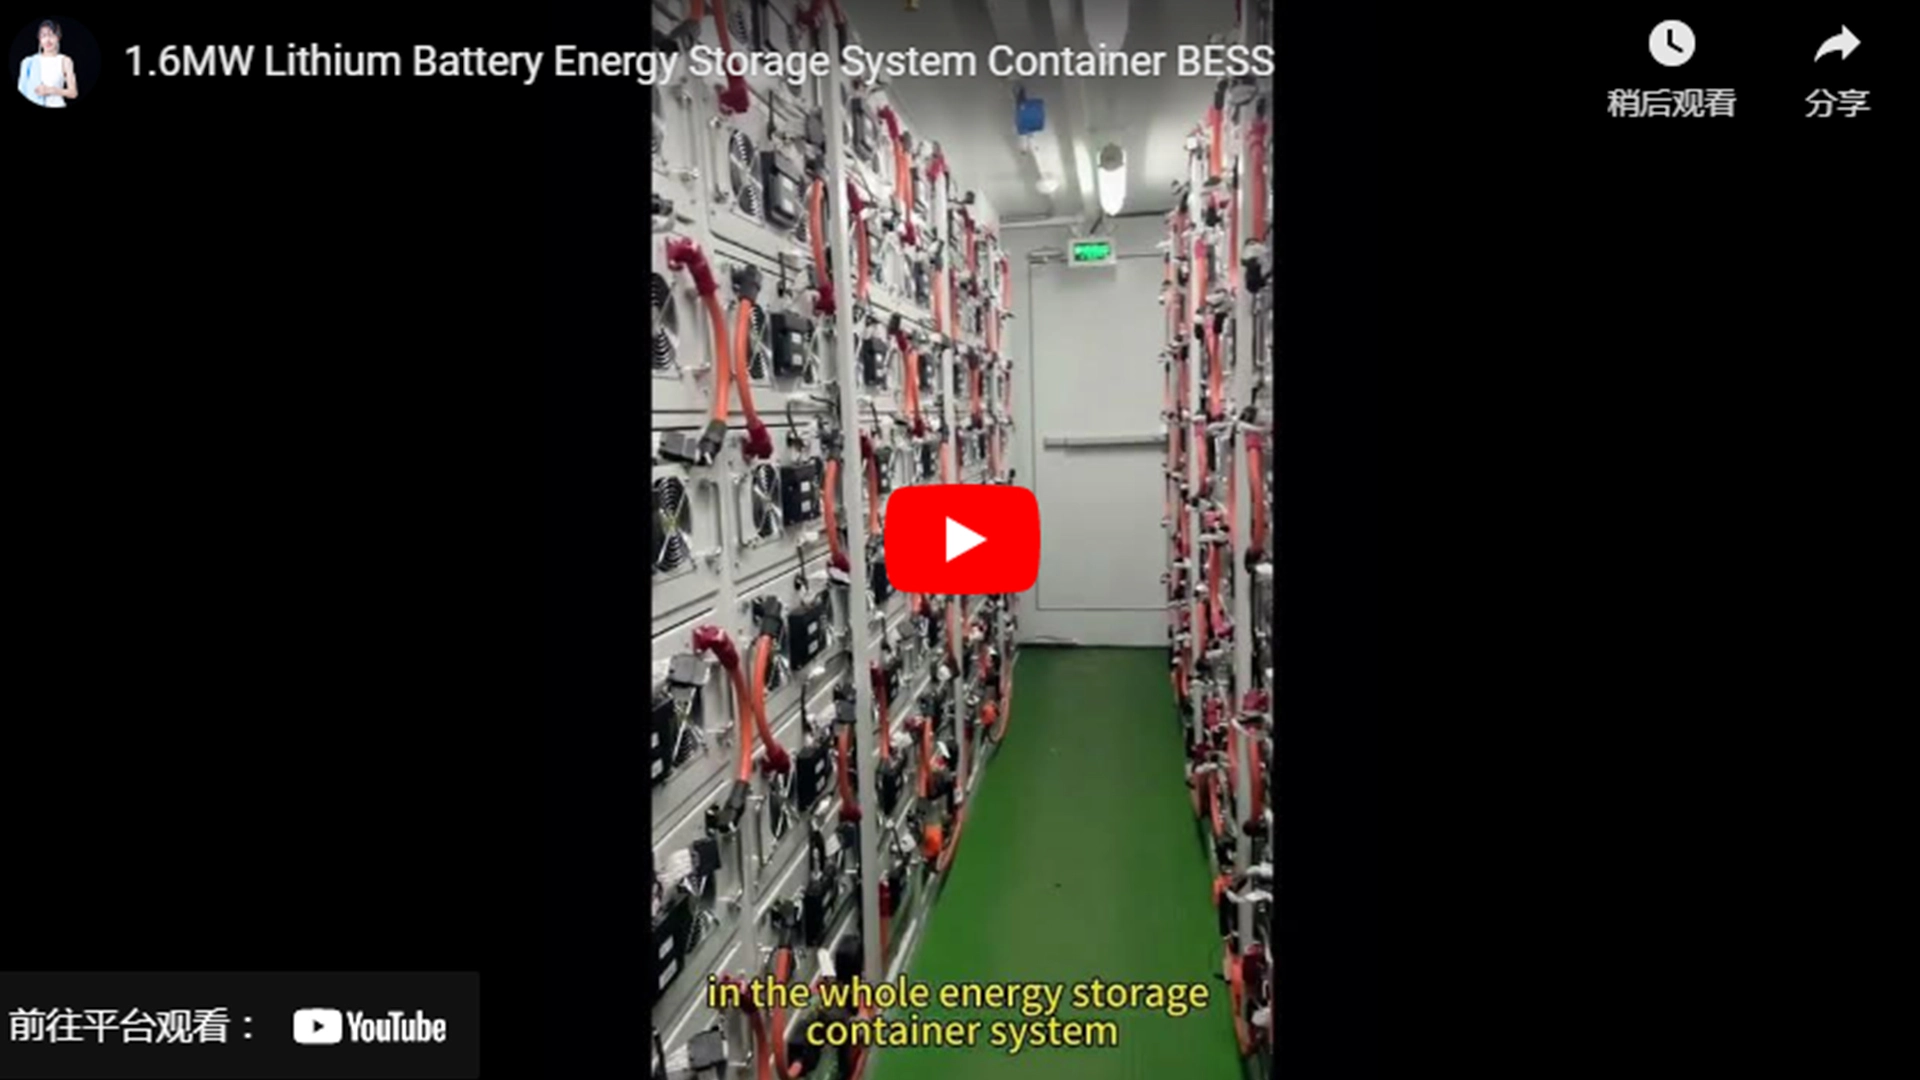 1.6MW Lithium Battery Energy Storage System Container BESS